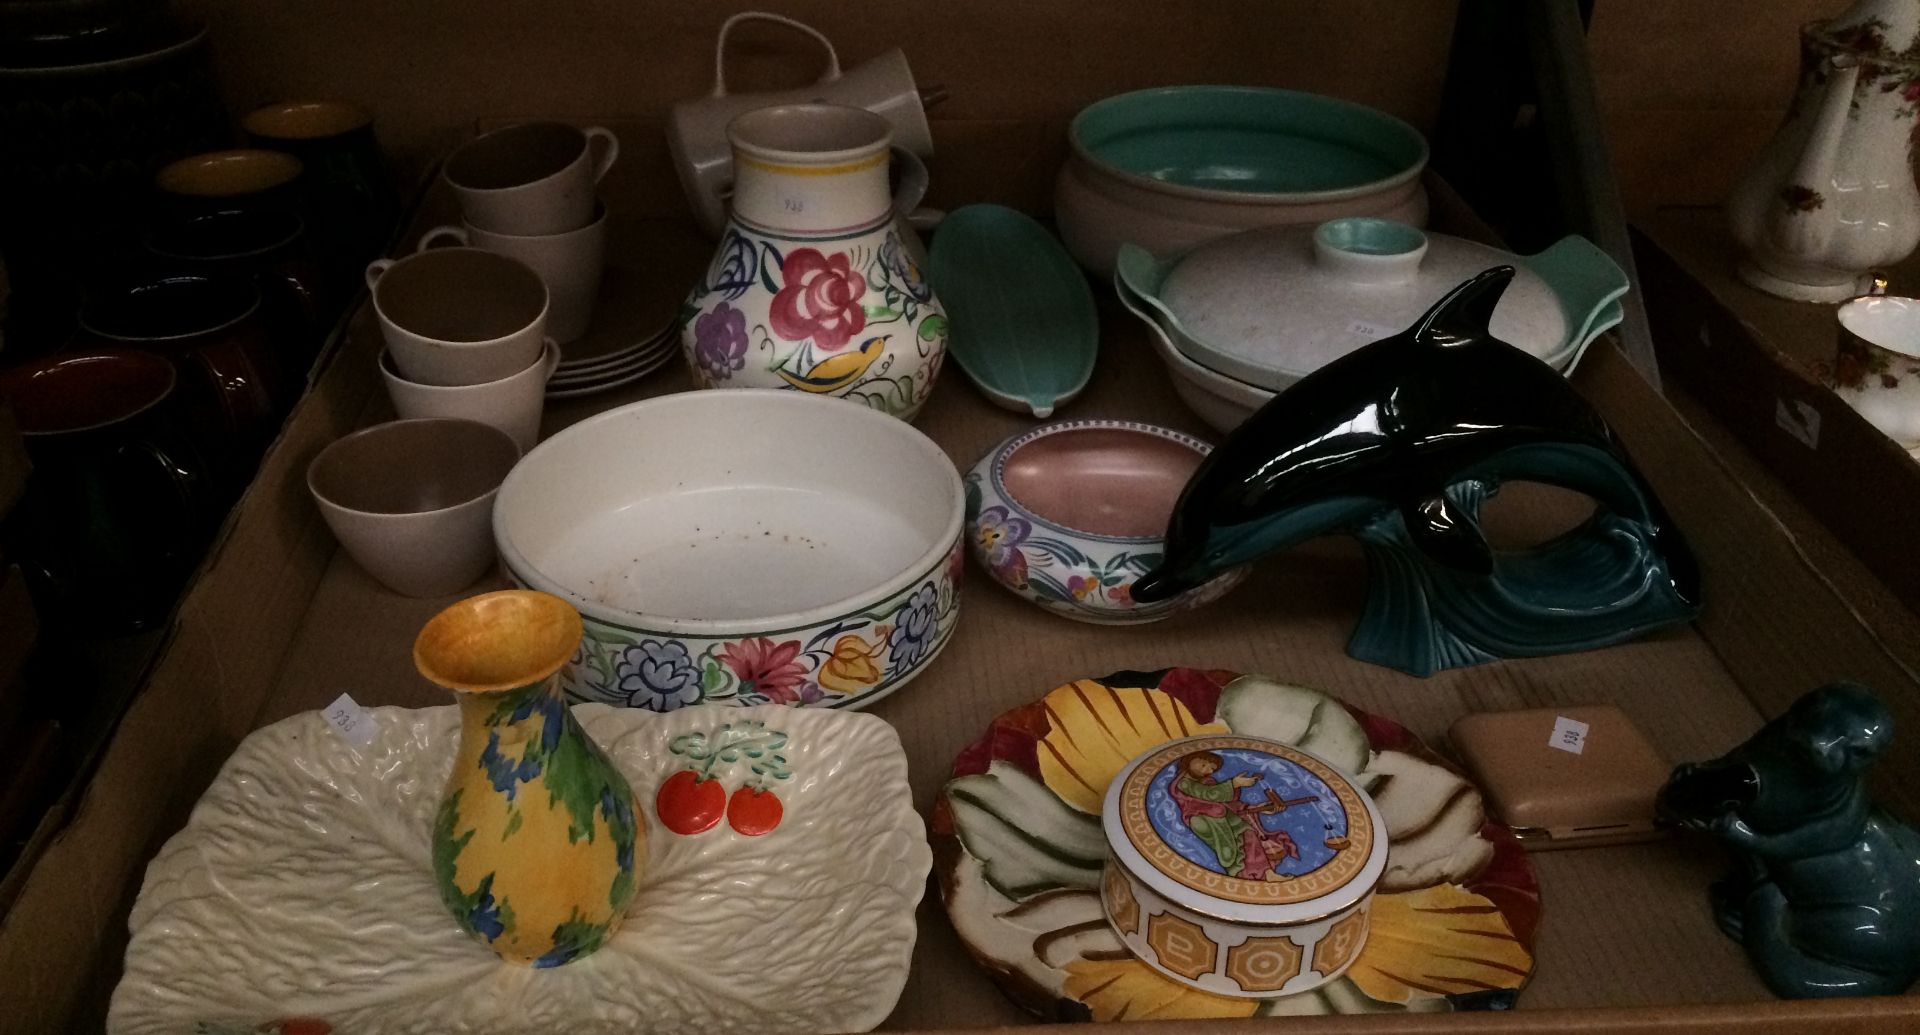 Contents to tray - mainly Poole Pottery items - blue glazed dolphin and seal, floral patterned bowl,